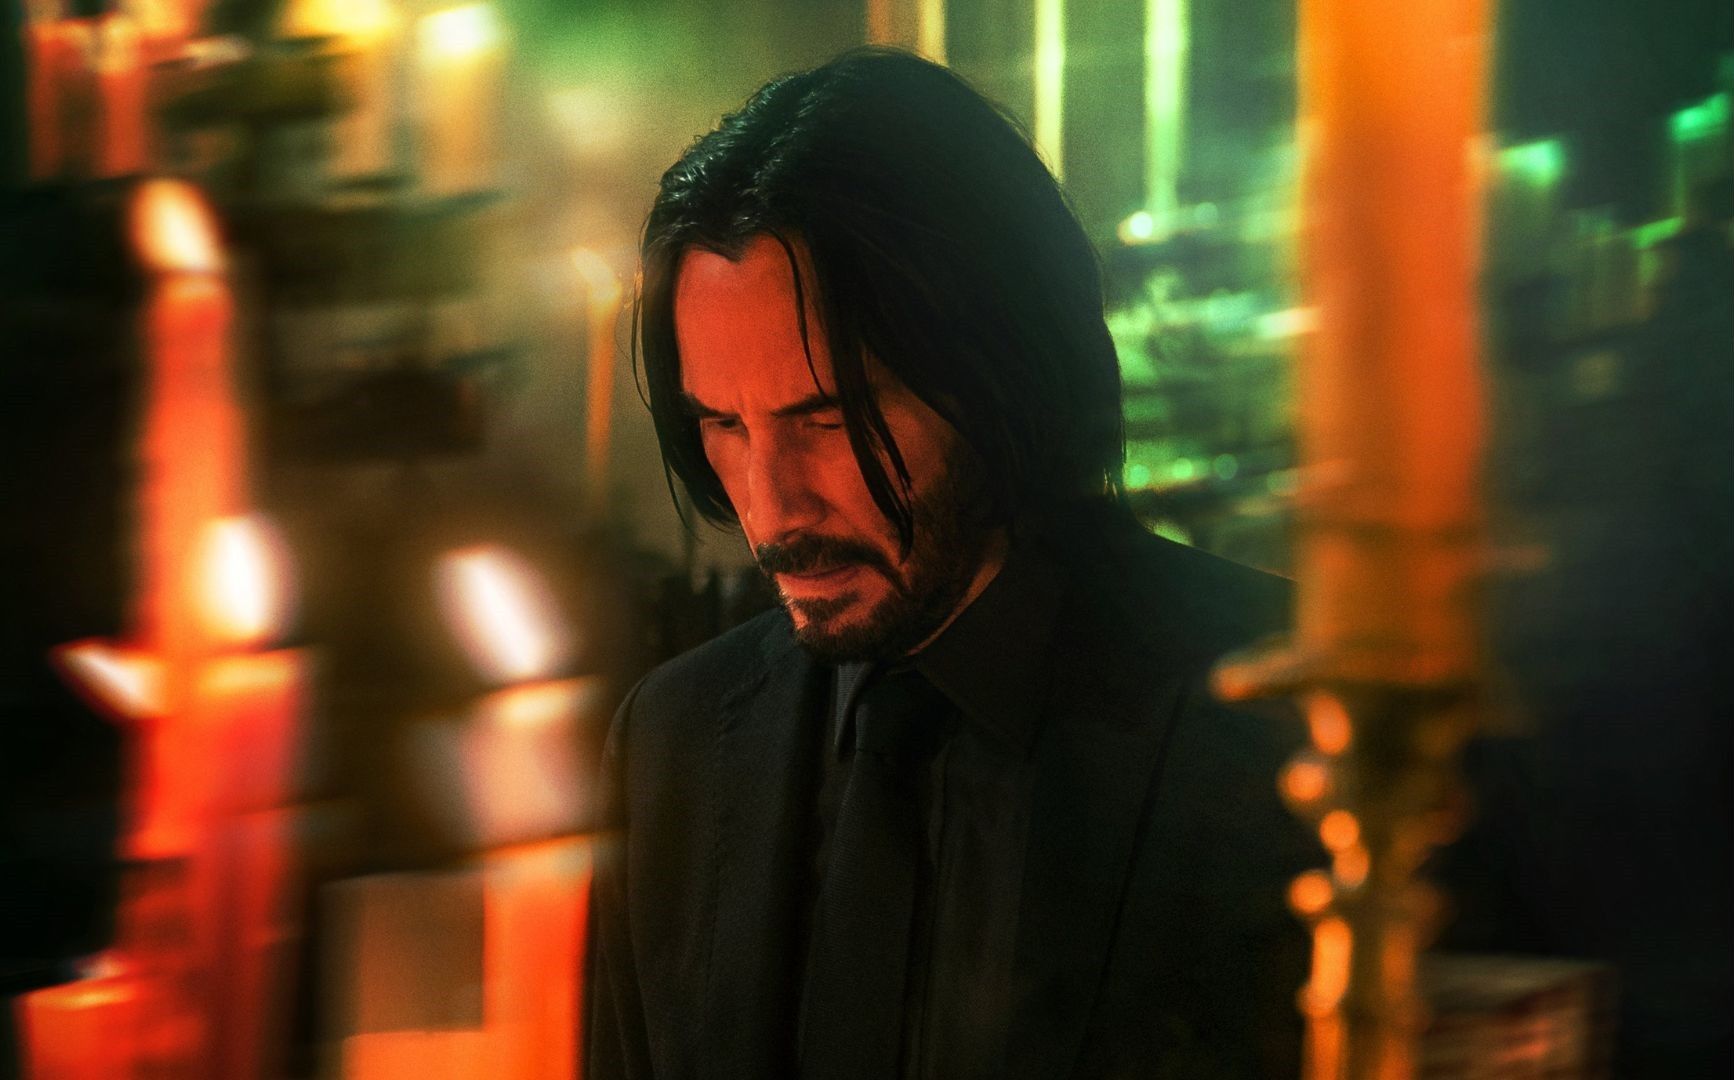 Keanu Reeves ramps up action to Westlife song in 'John Wick 4' trailer